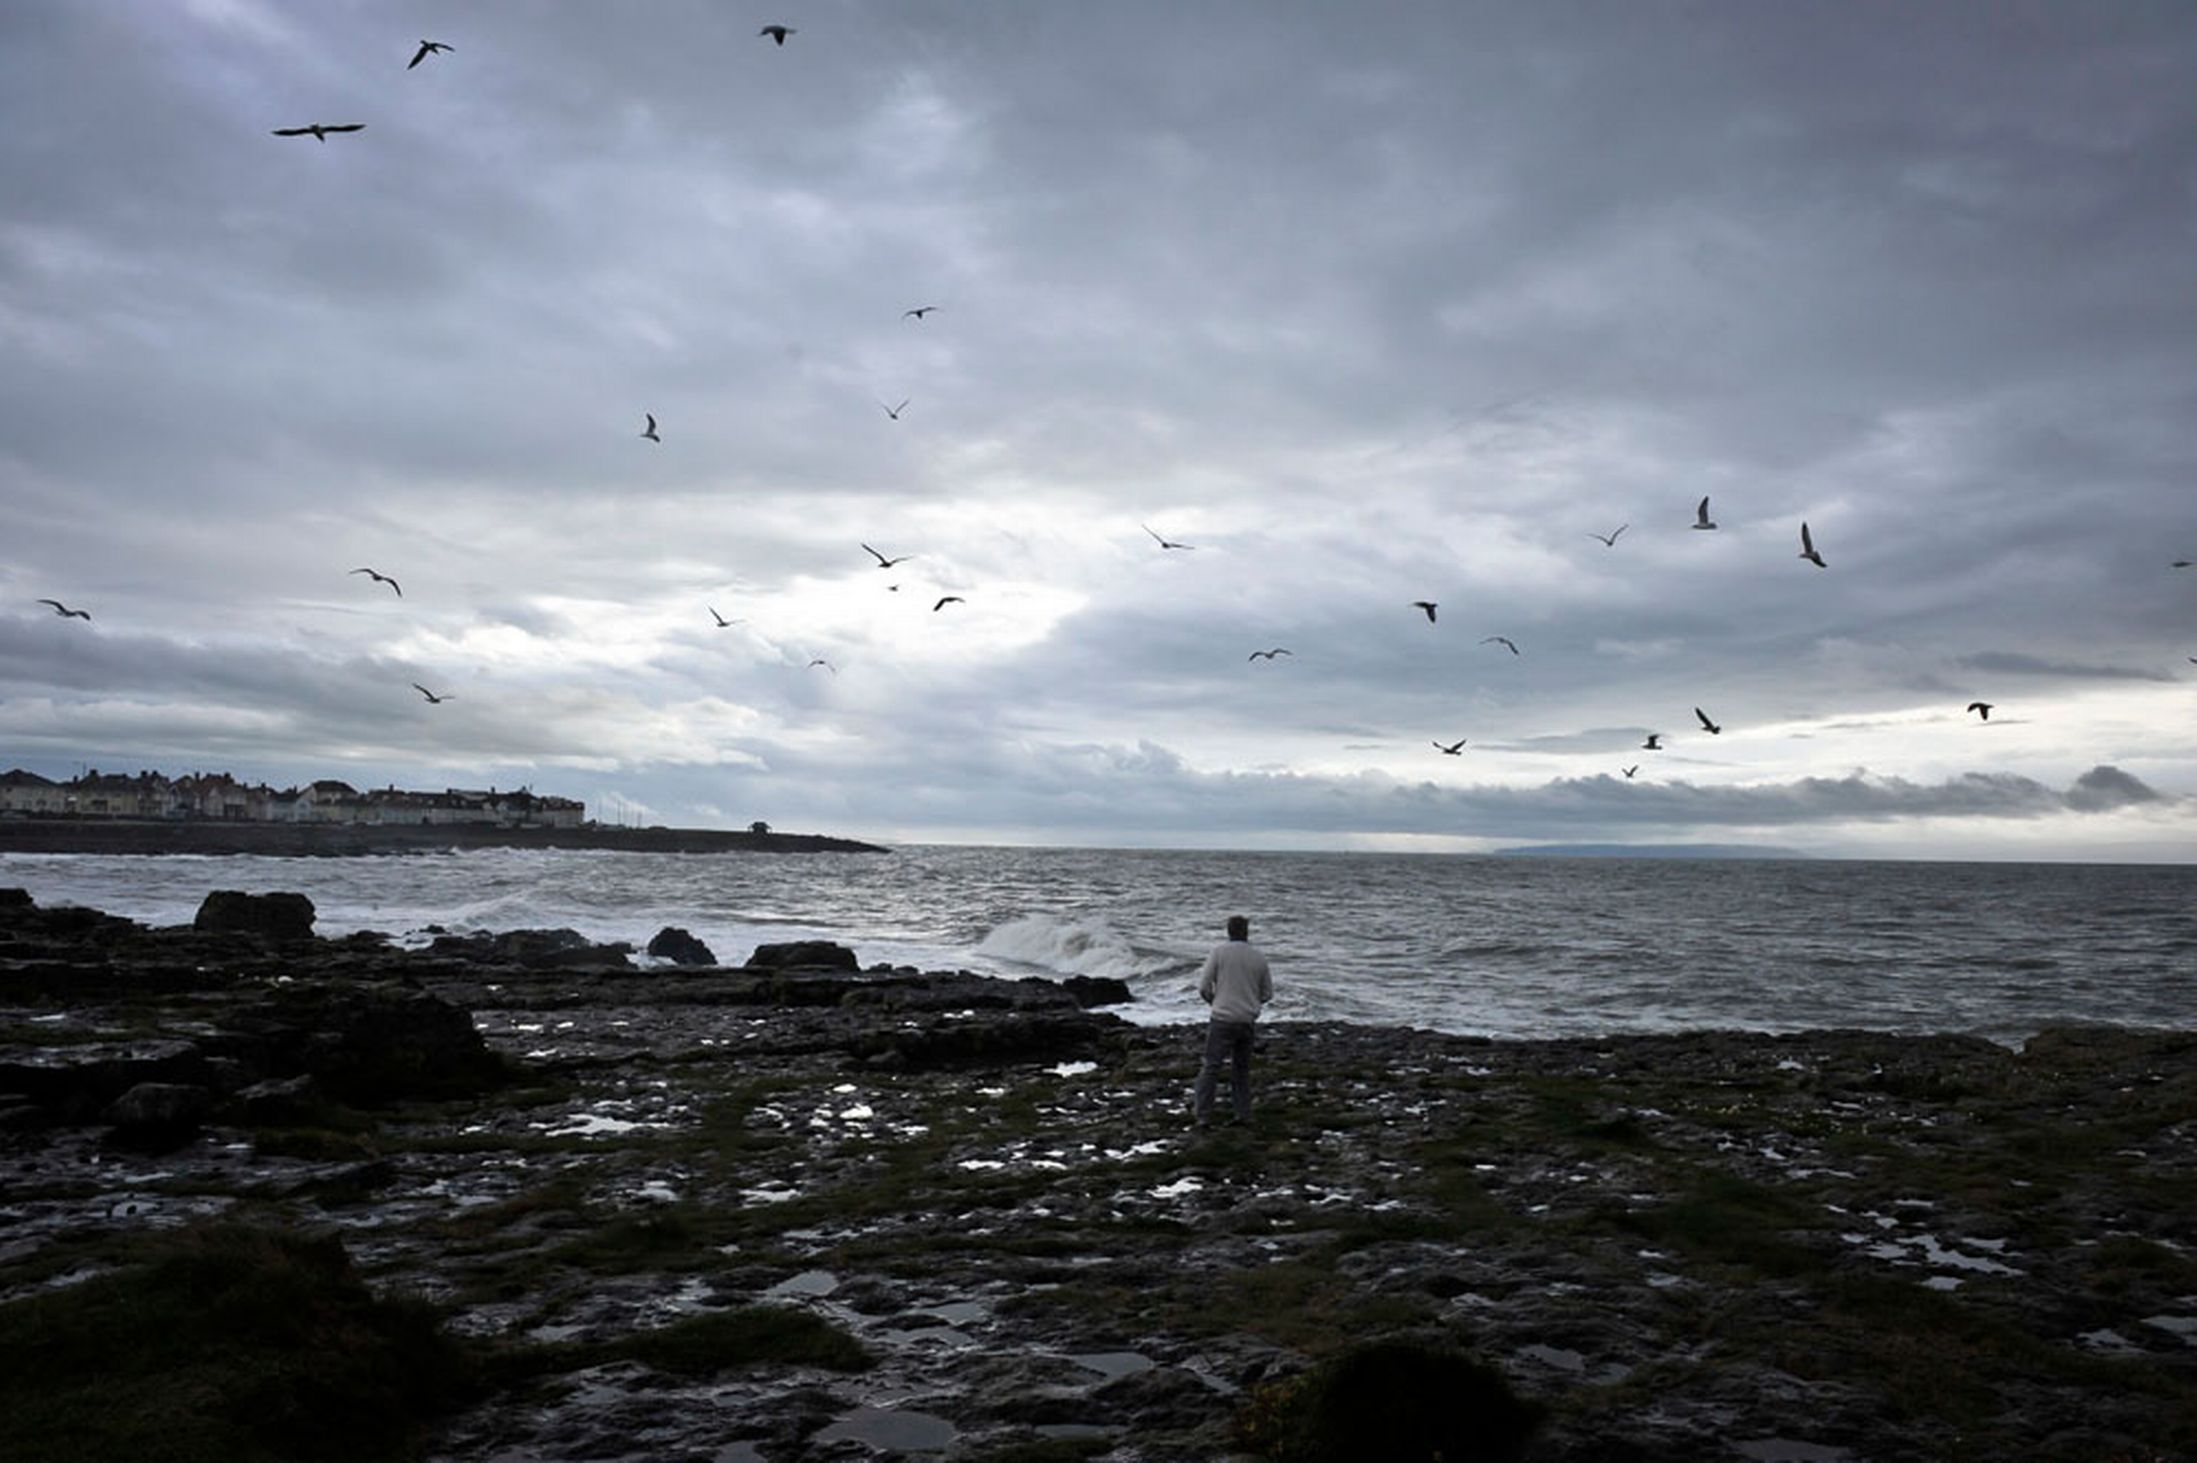 A-man-feeds-seagulls-by-the-sea-at-Porthcawl-Wales-beneath-stormy-skies-22nd-October-2641152